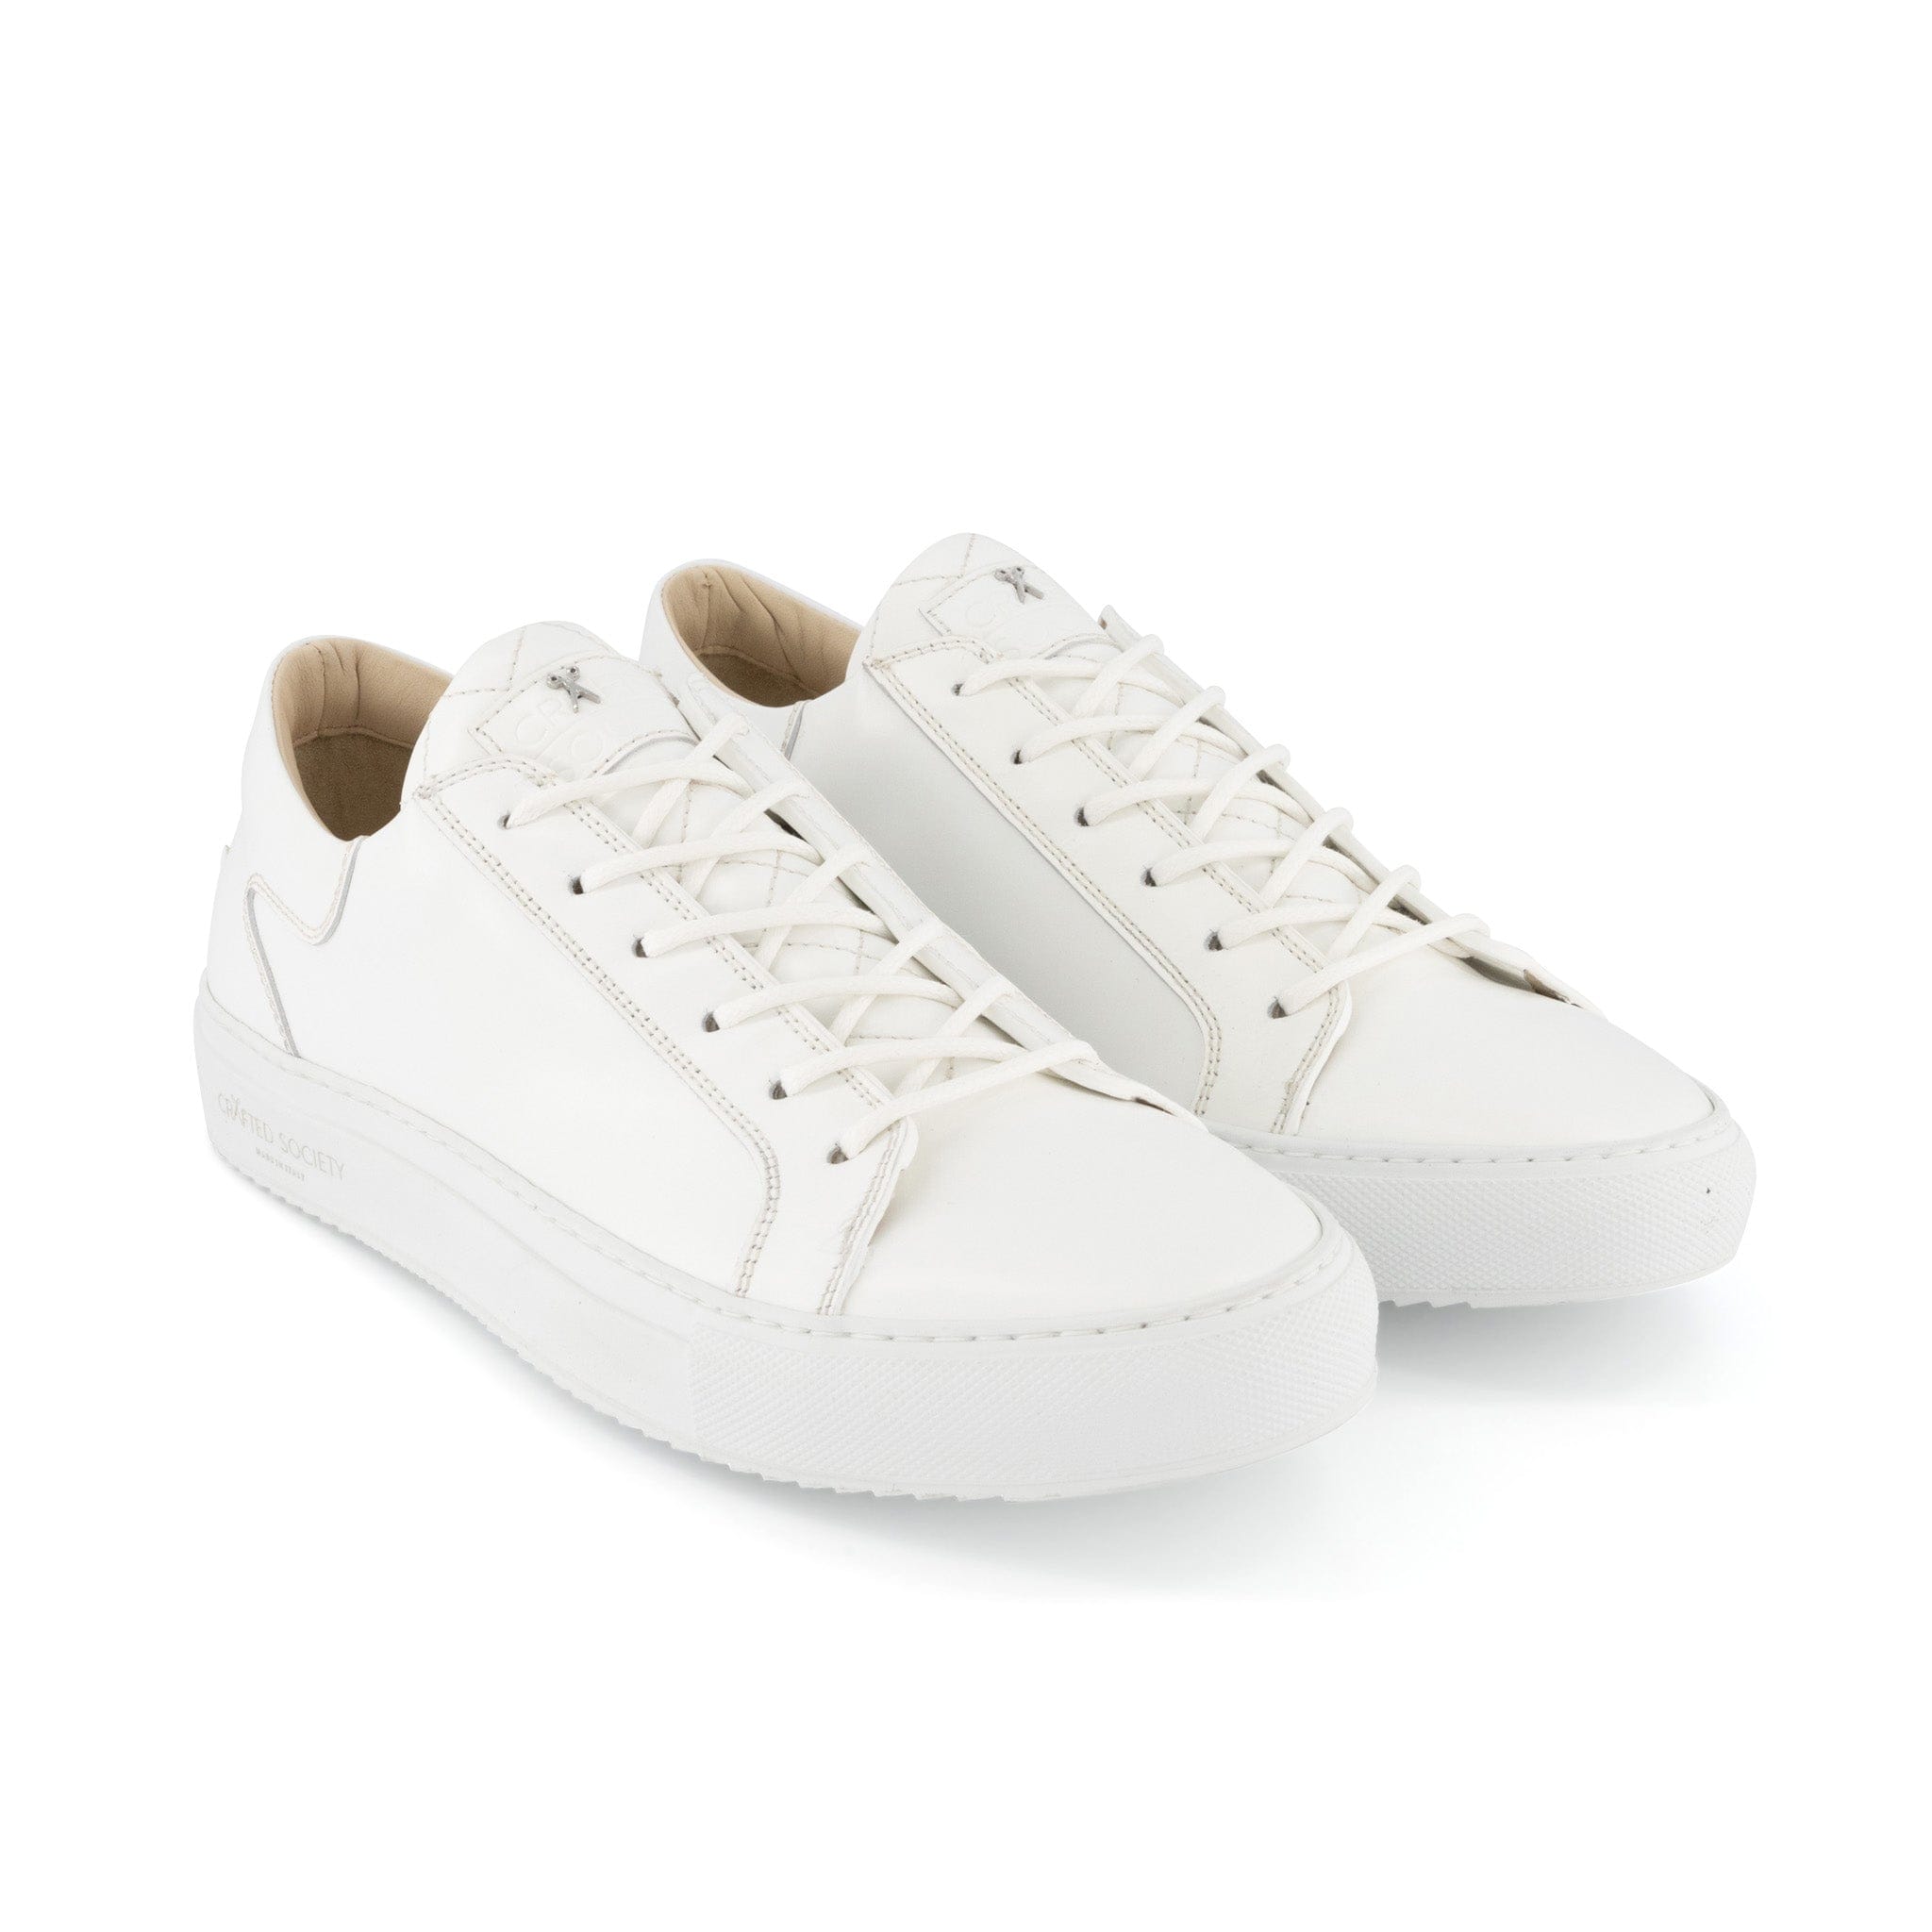 White Low Top Sneakers - Italian Leather Shoes